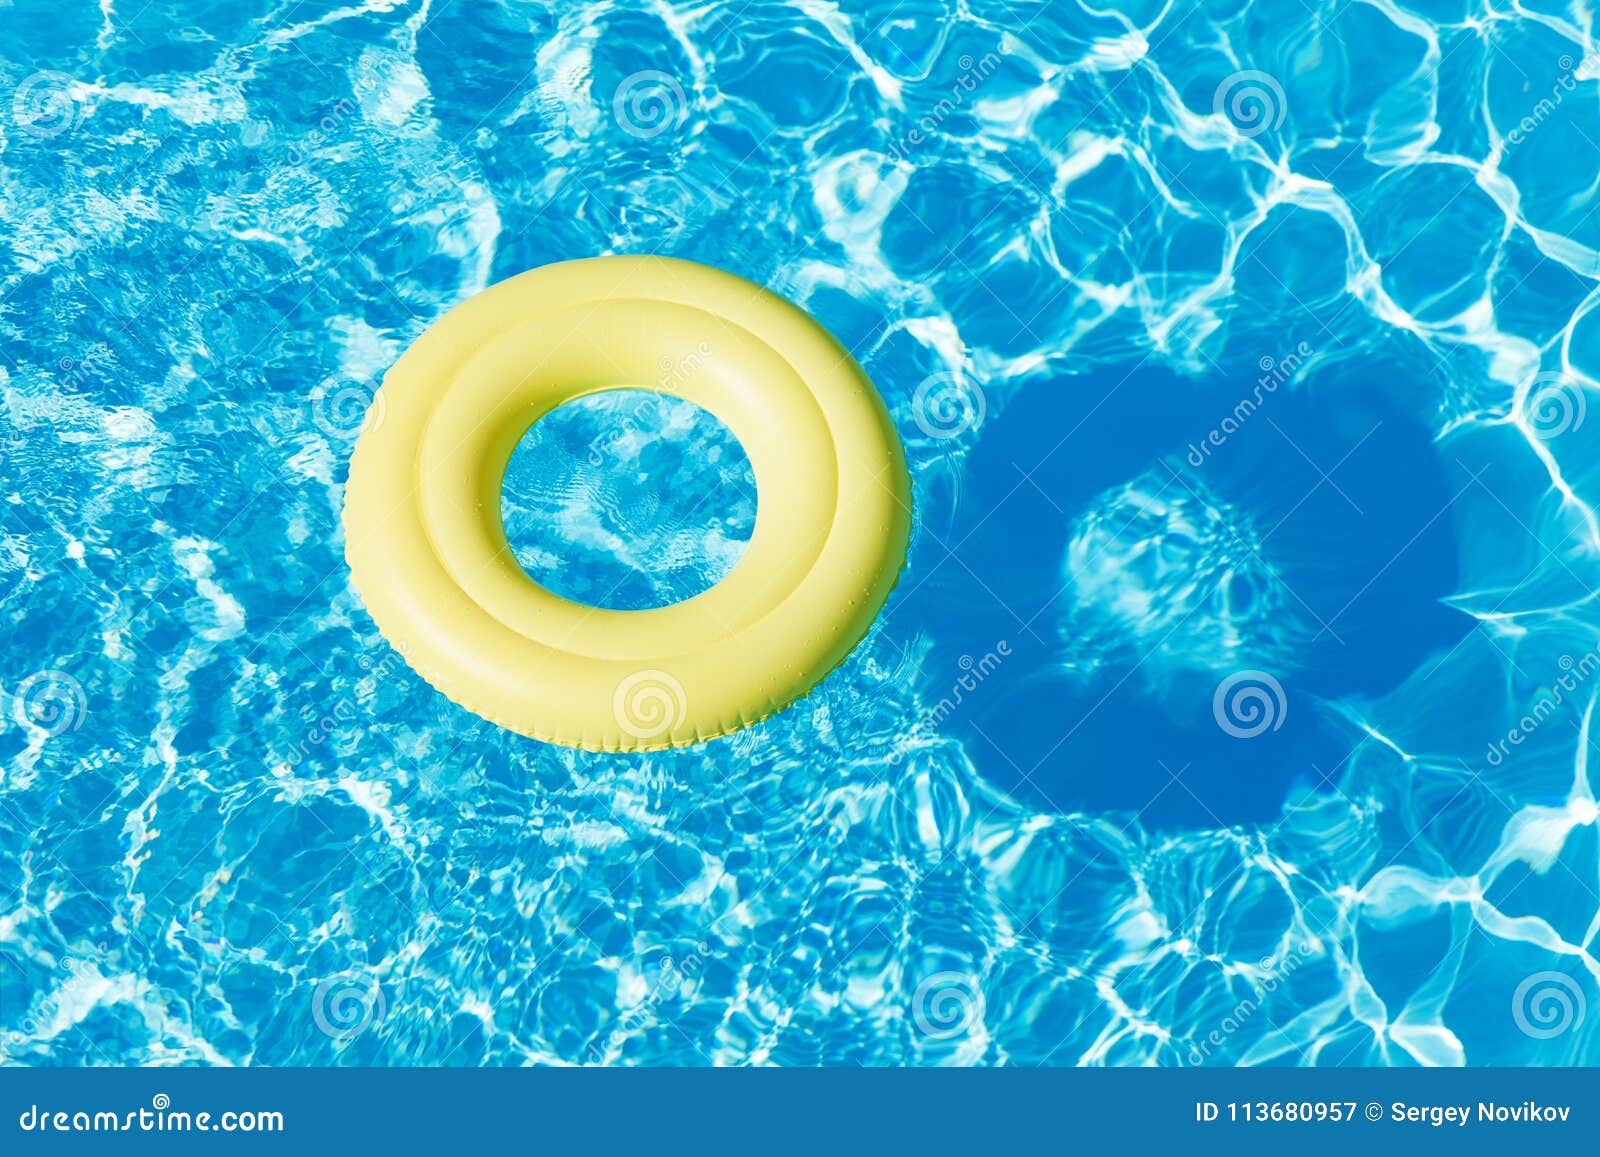 Yellow Rubber Ring Floating on the Water Surface Stock Image - Image of ...